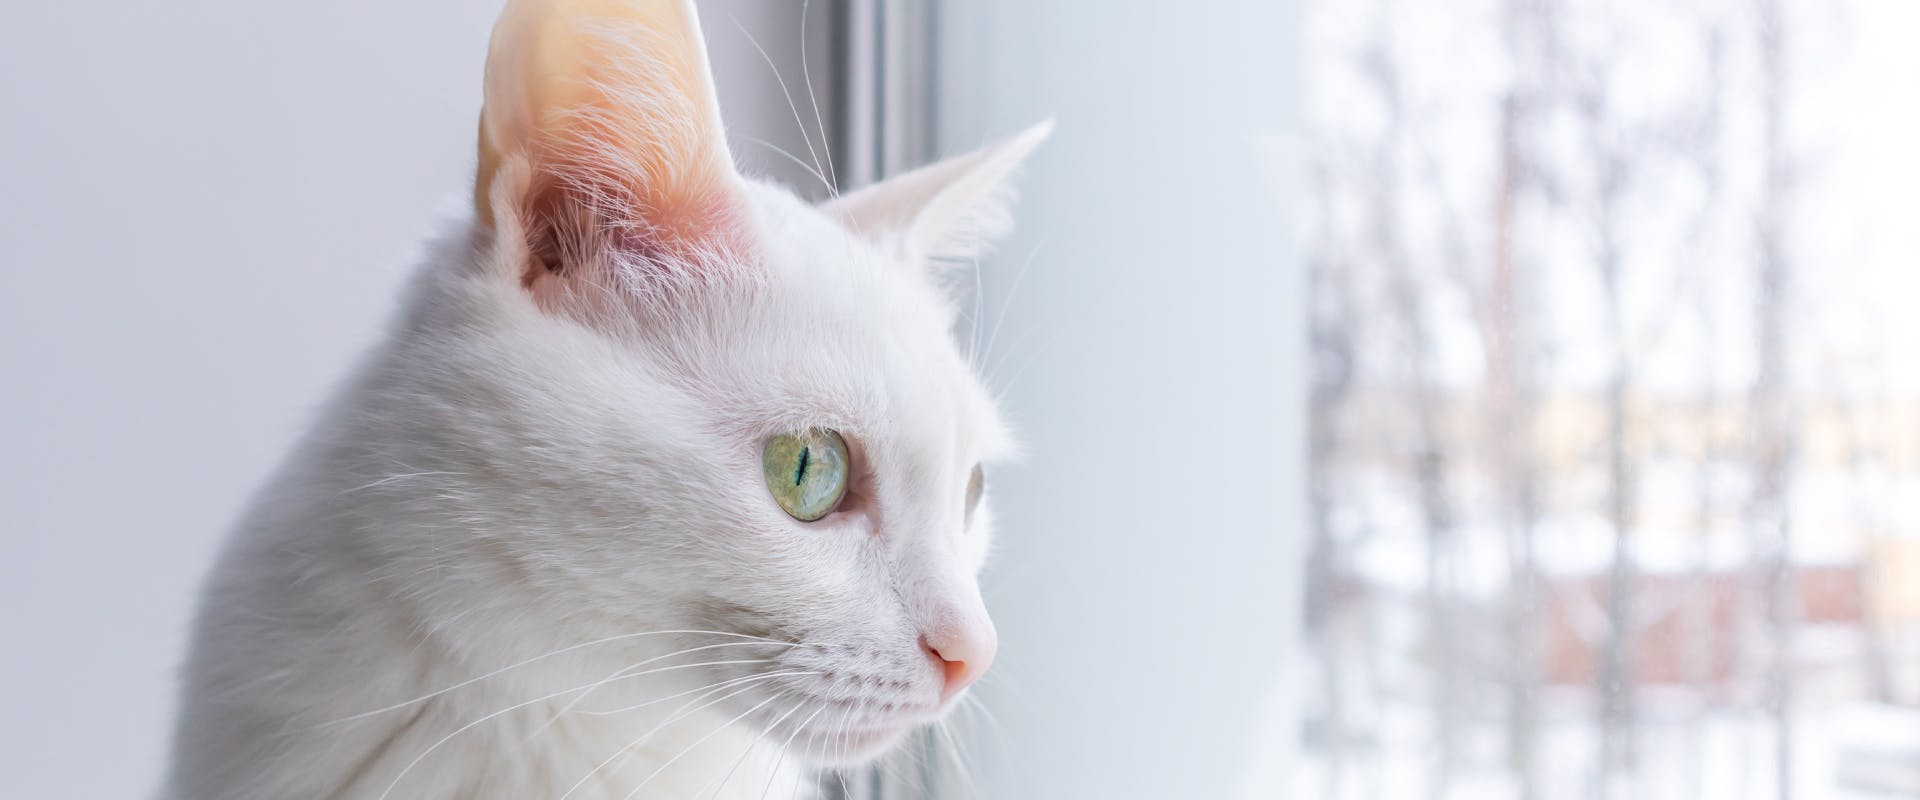 all white cat with green eyes looking out of a window